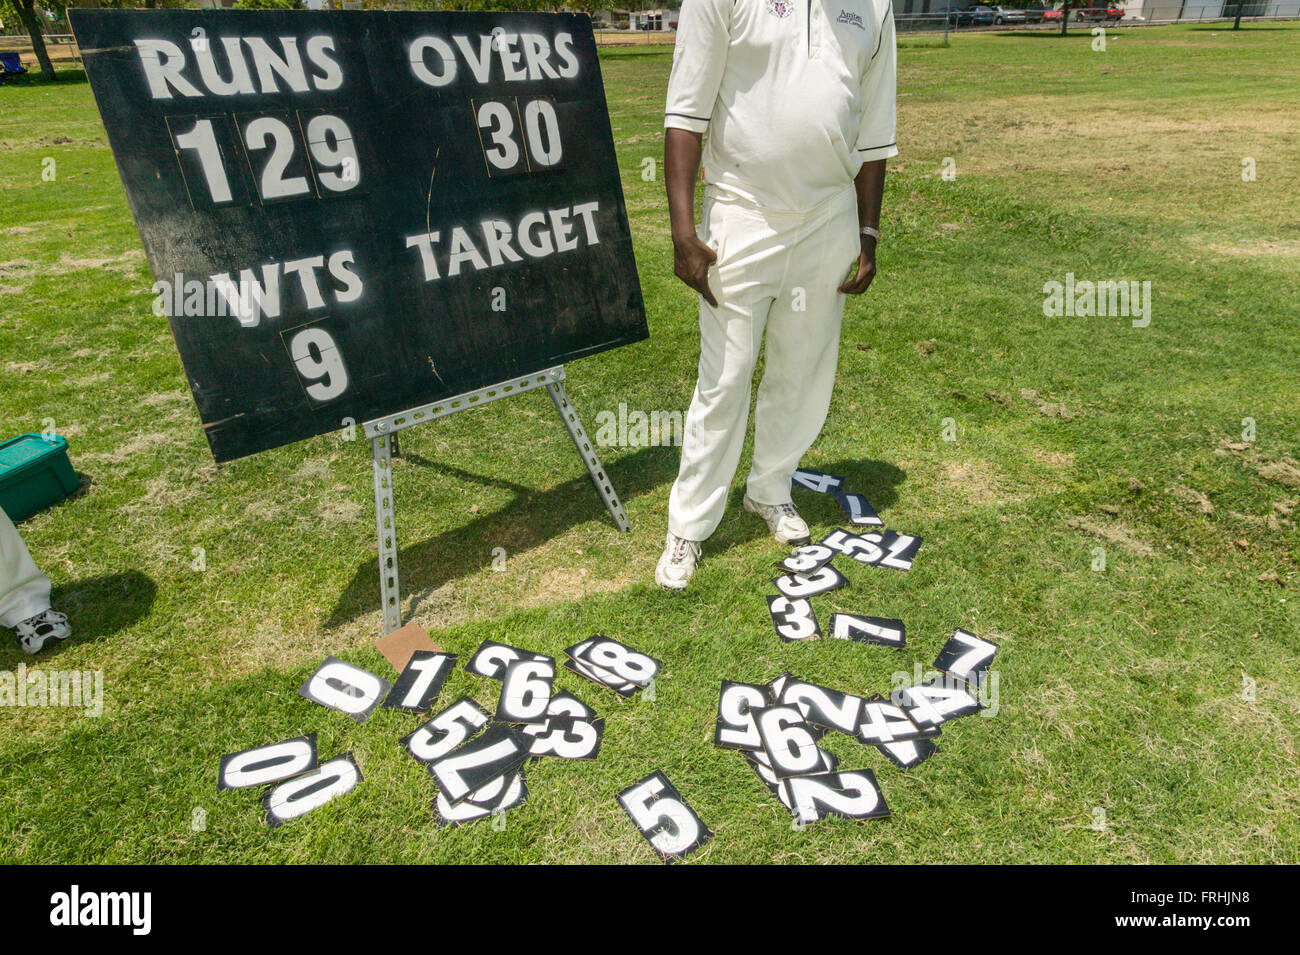 BUENA PARK, CA – JANUARY 30: Los Angeles cricket team British & Dominion play a game in Buena Park, California on July 09, 2005. Stock Photo